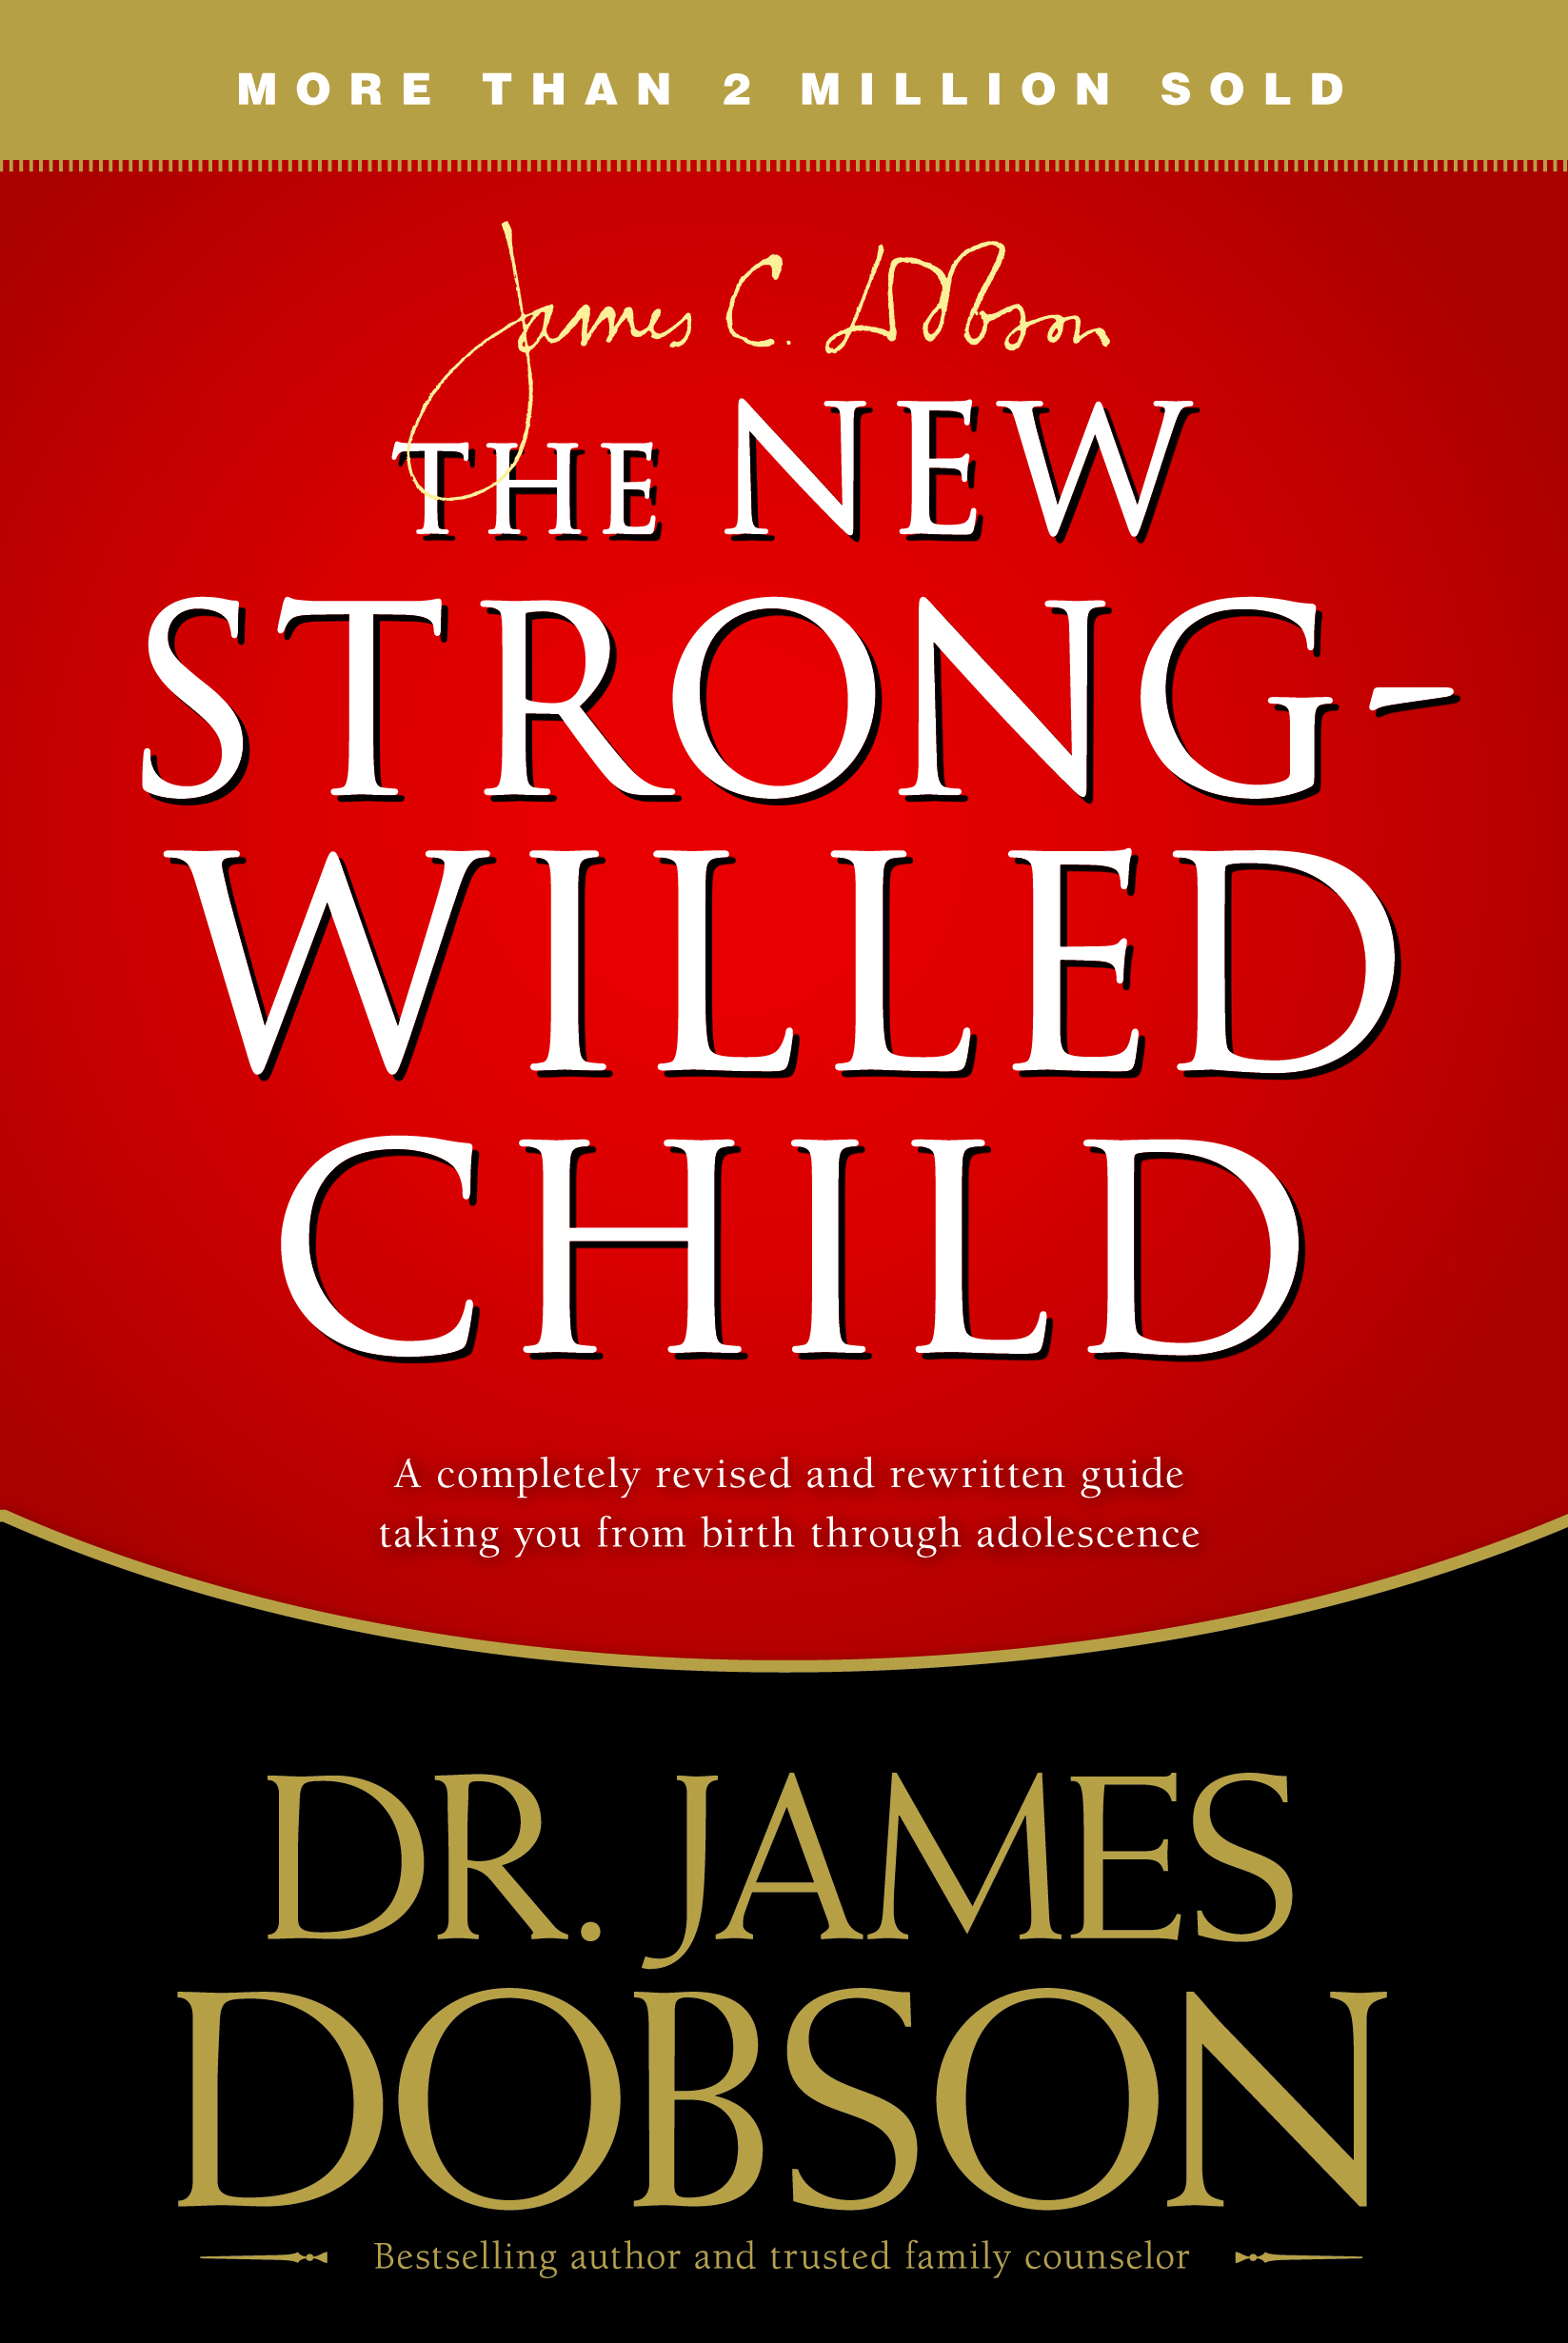 The New Strong-Willed Child by Dr. James Dobson Book Review | Making the Most Blog